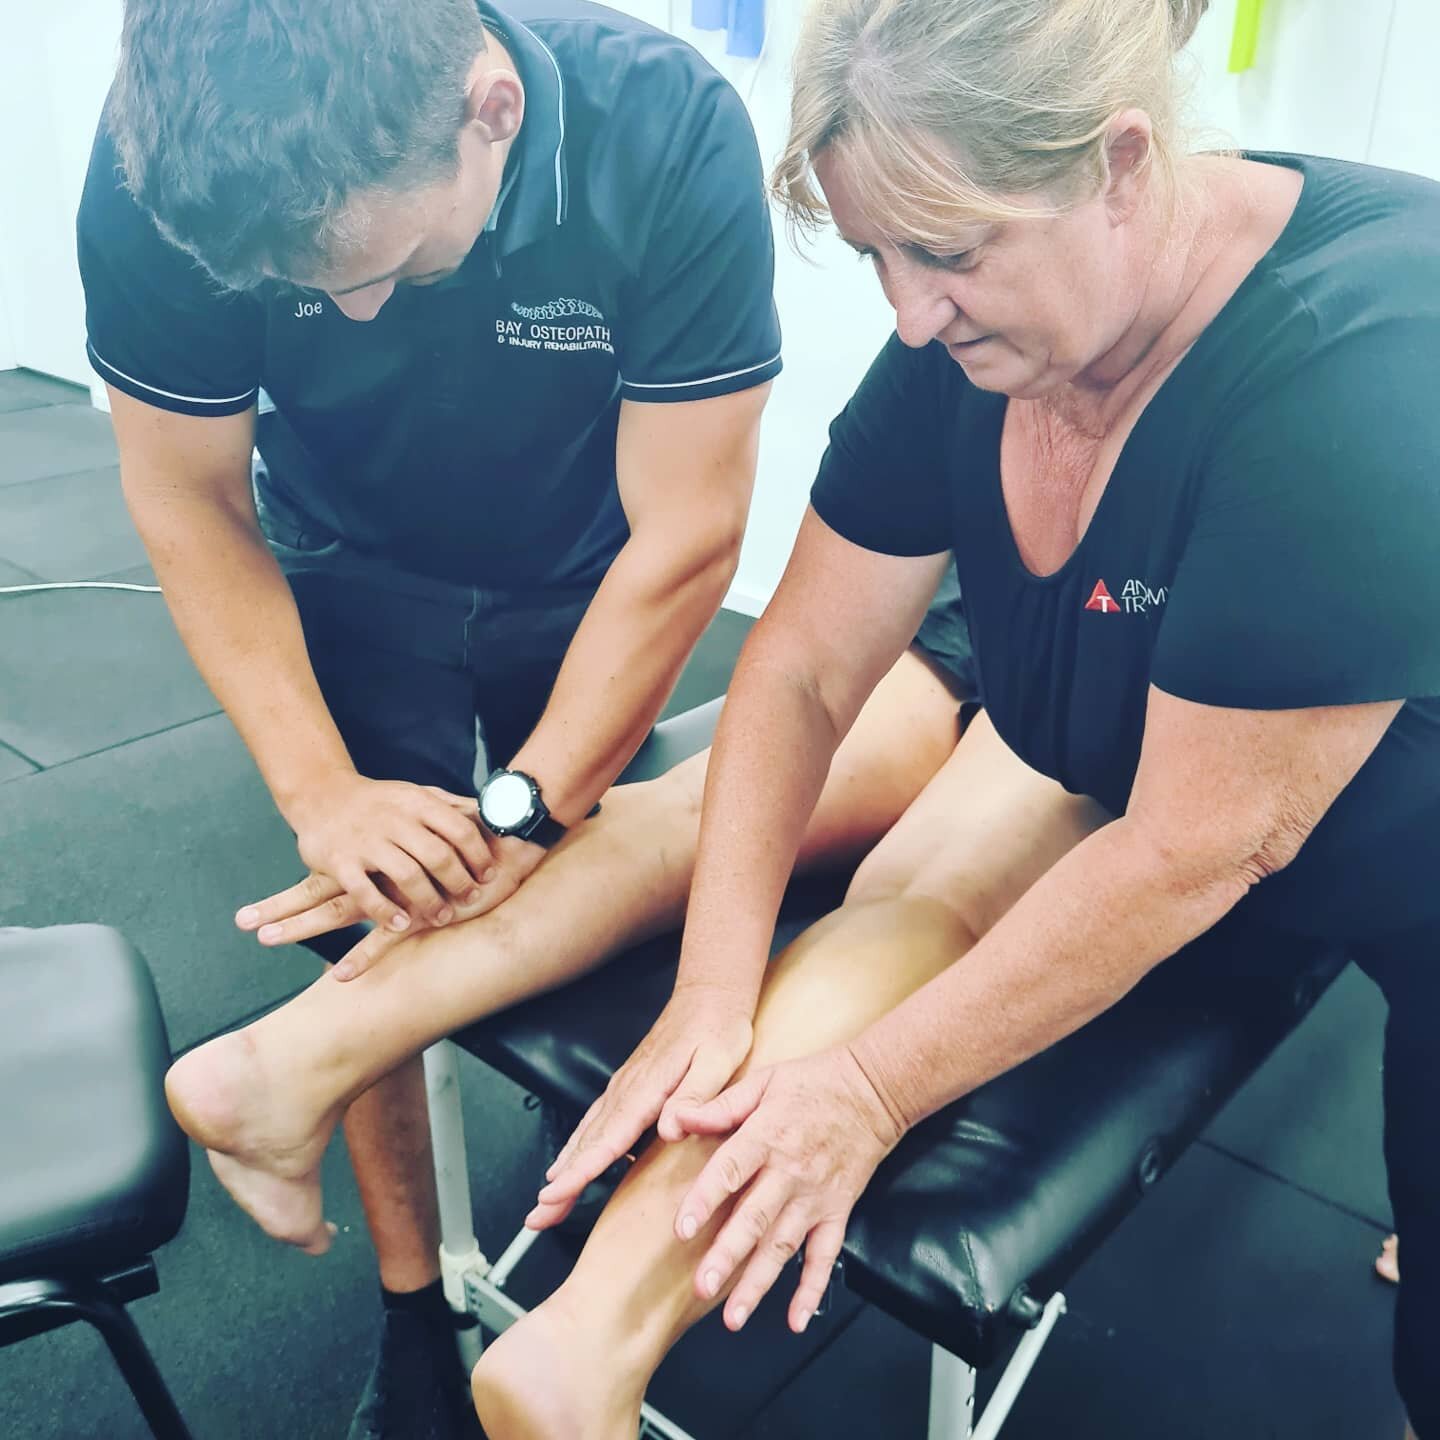 Last week we were invited to attend a workshop presented by Julie from @anatomytrainsofficial with other local health professionals.

We feel very fortunate to have experts in the field stop by Hervey Bay and provide us with the opportunity to deepen